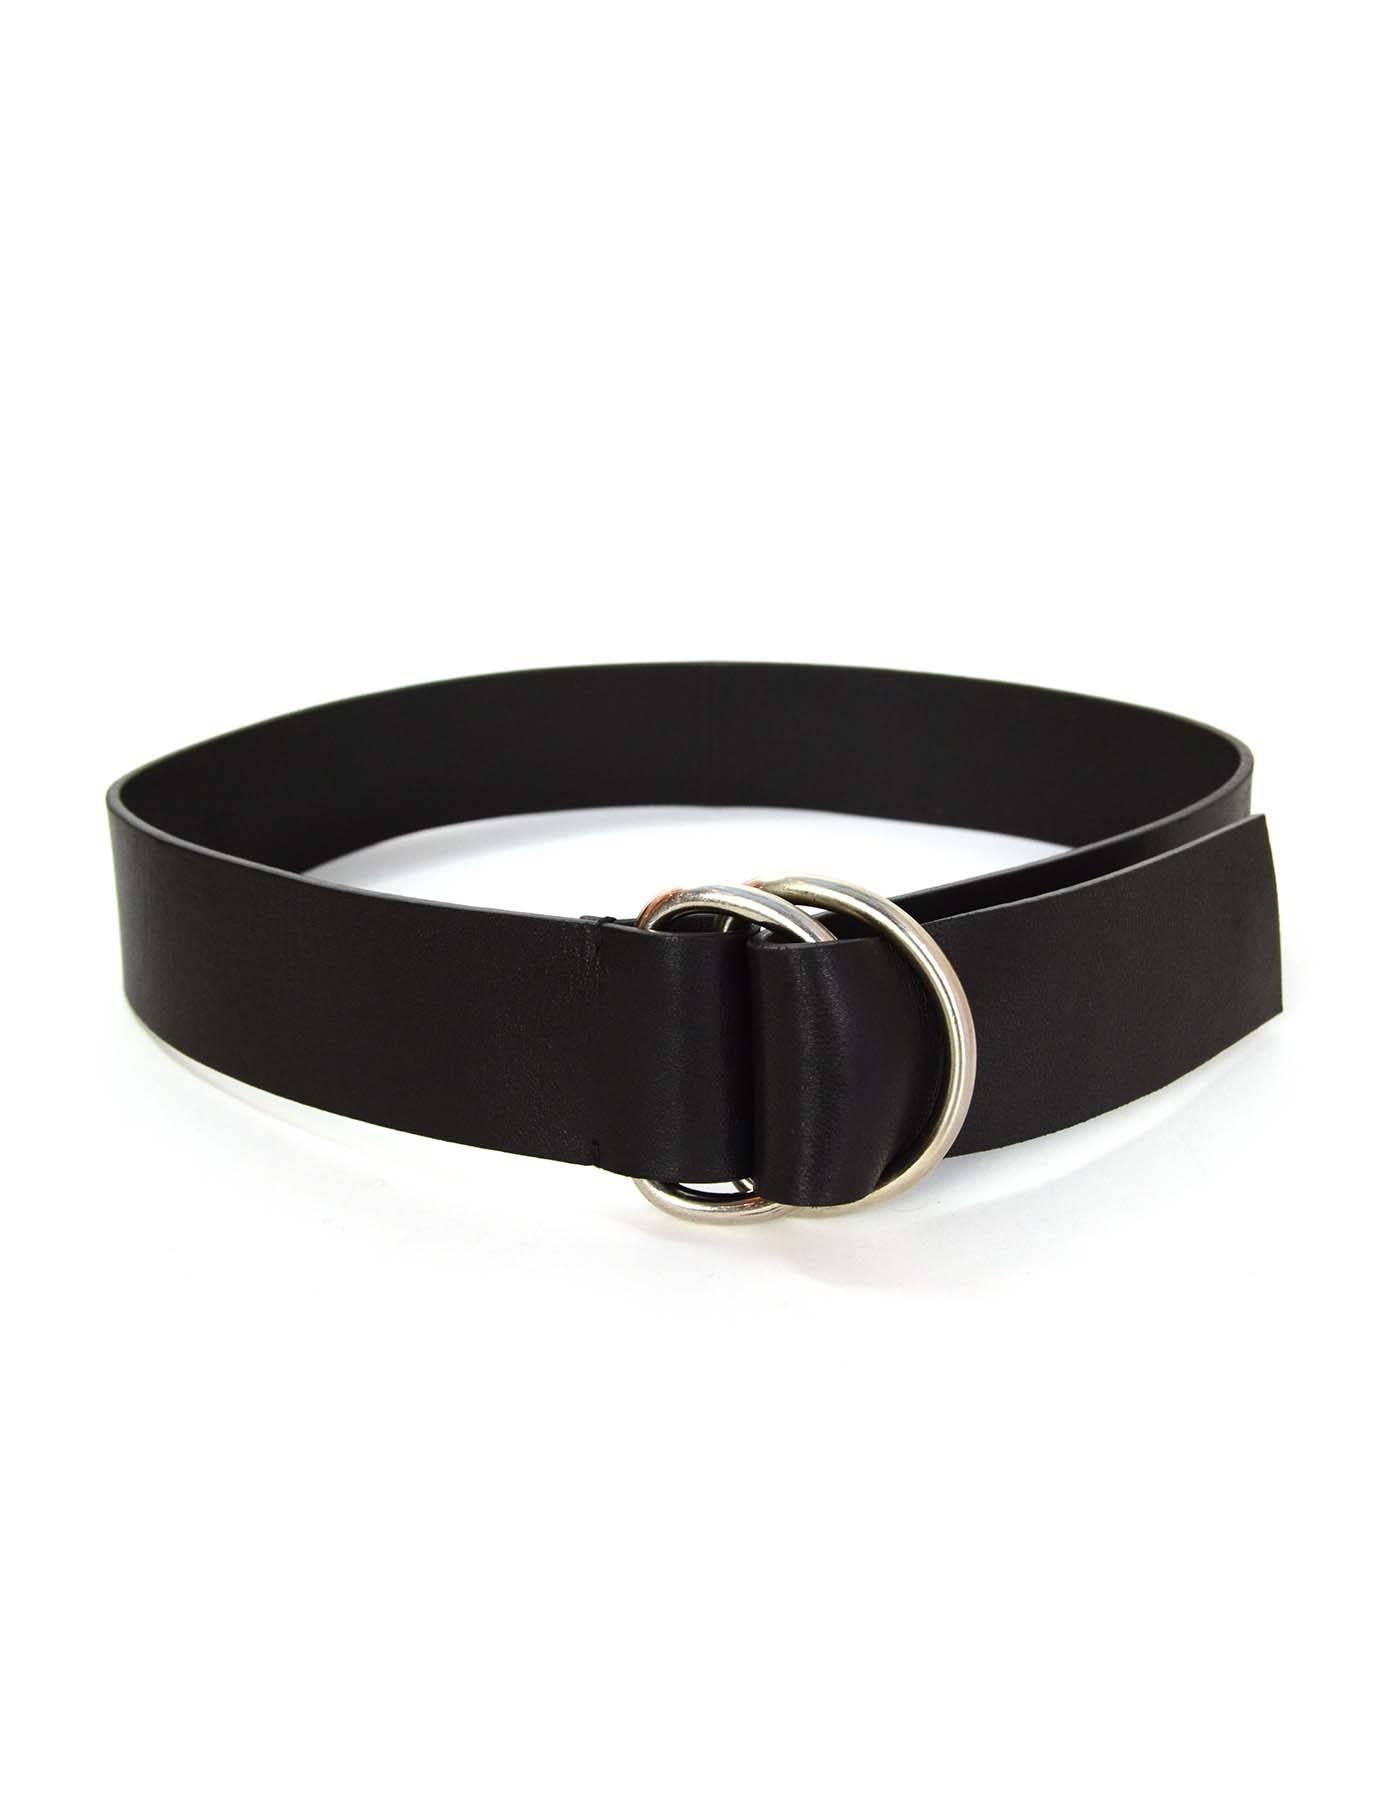 Prada Black Leather Belt sz 85 SHW
Features silver hardware ring belt buckles

Made In: Italy
Color: Black
Hardware: Silvertone
Materials: Leather
Closure/Opening: Ring belt buckle closure
Stamp: 1C 2270
Overall Condition: Excellent